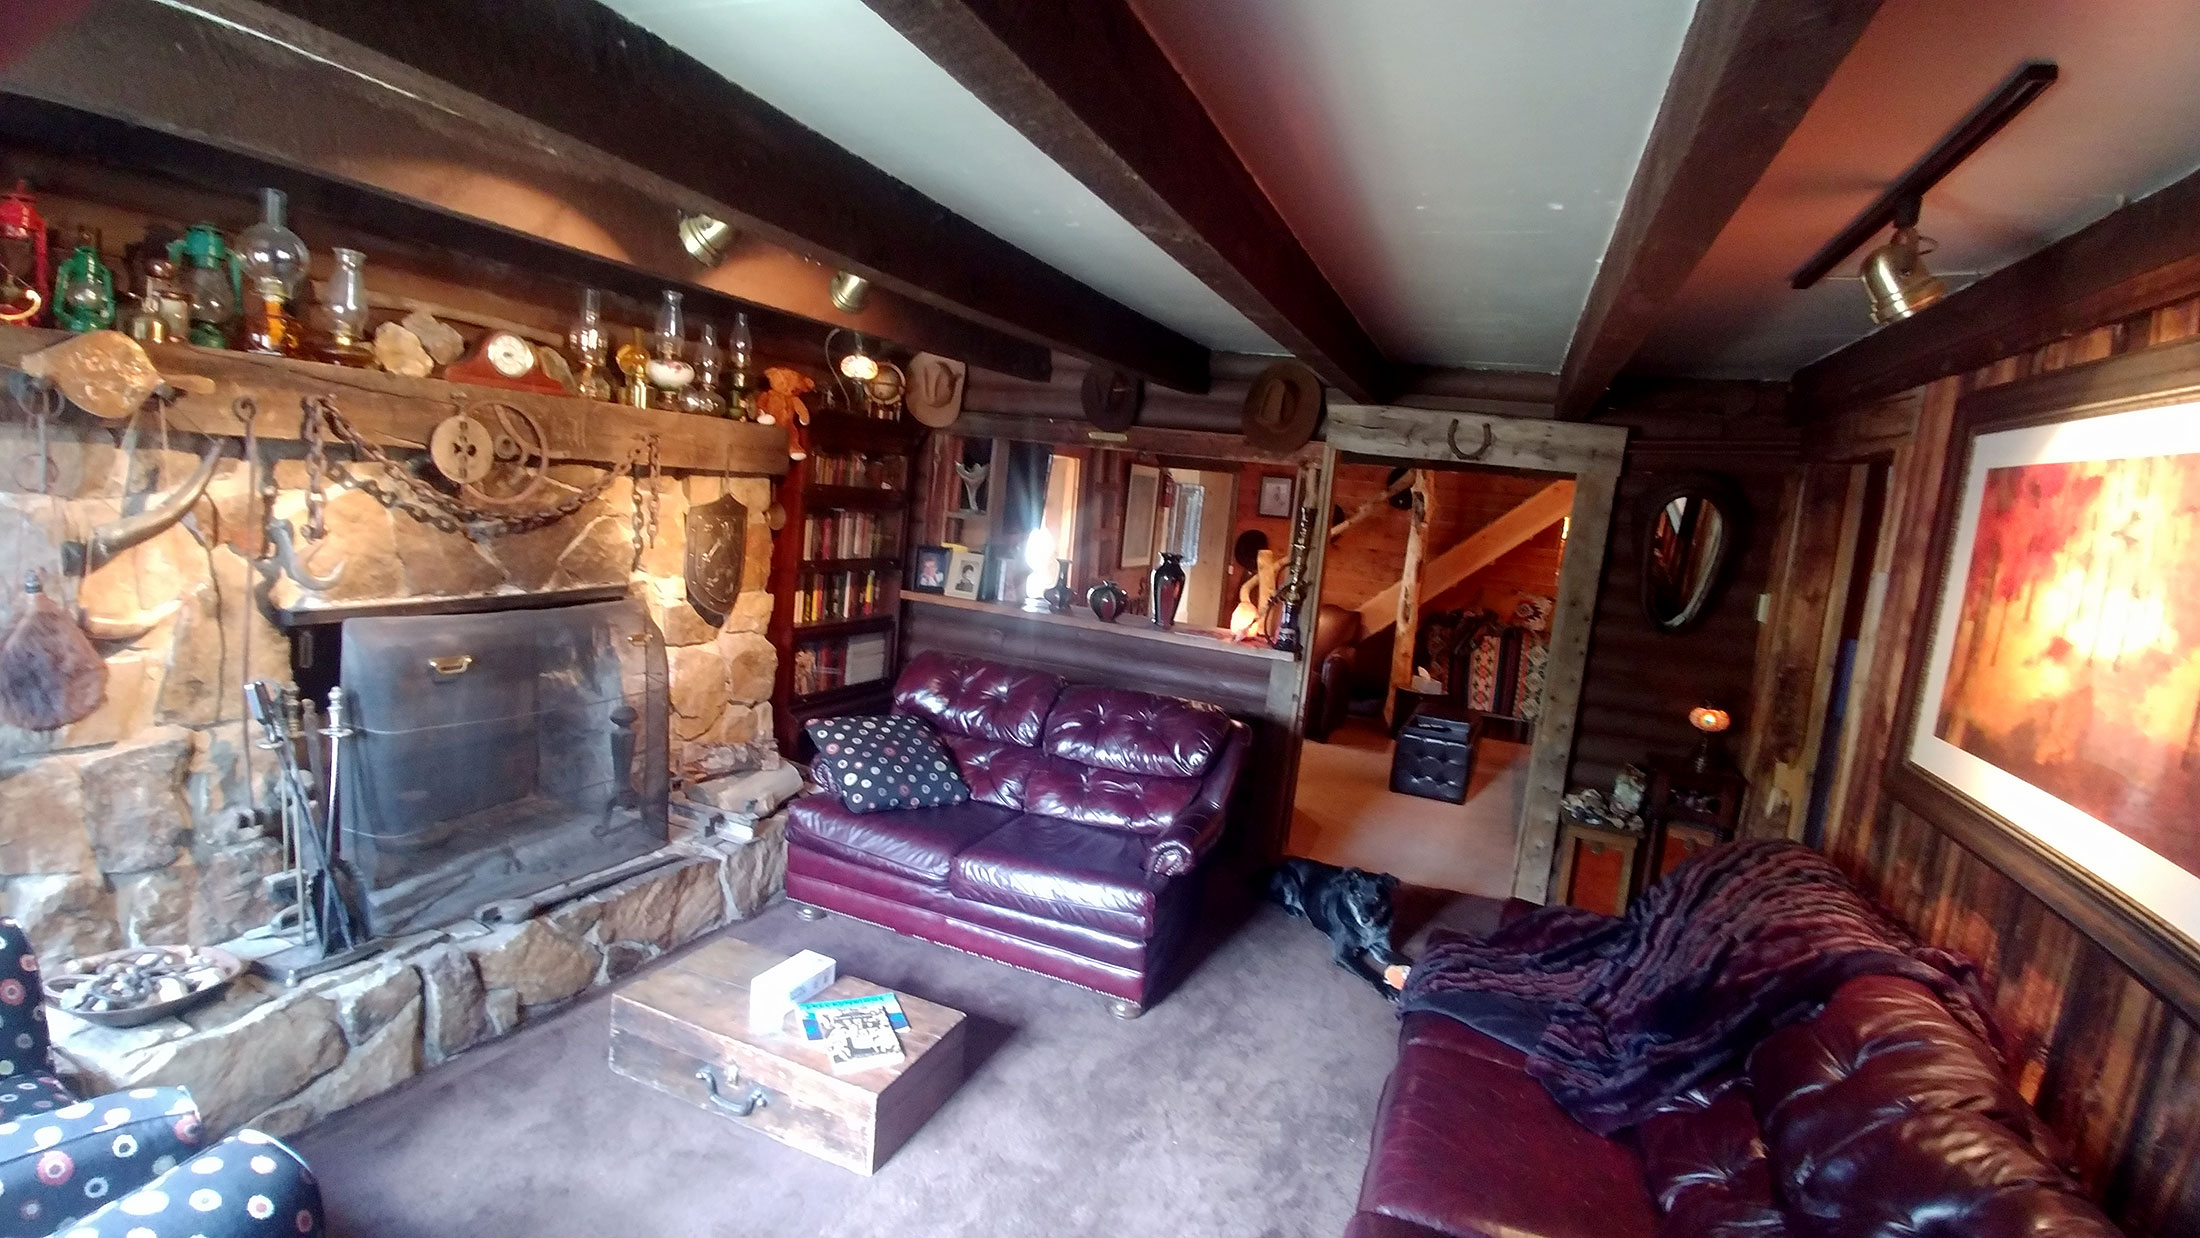 The fireplace room at the Bunk House Lodge in Breckenridge, Colorado.